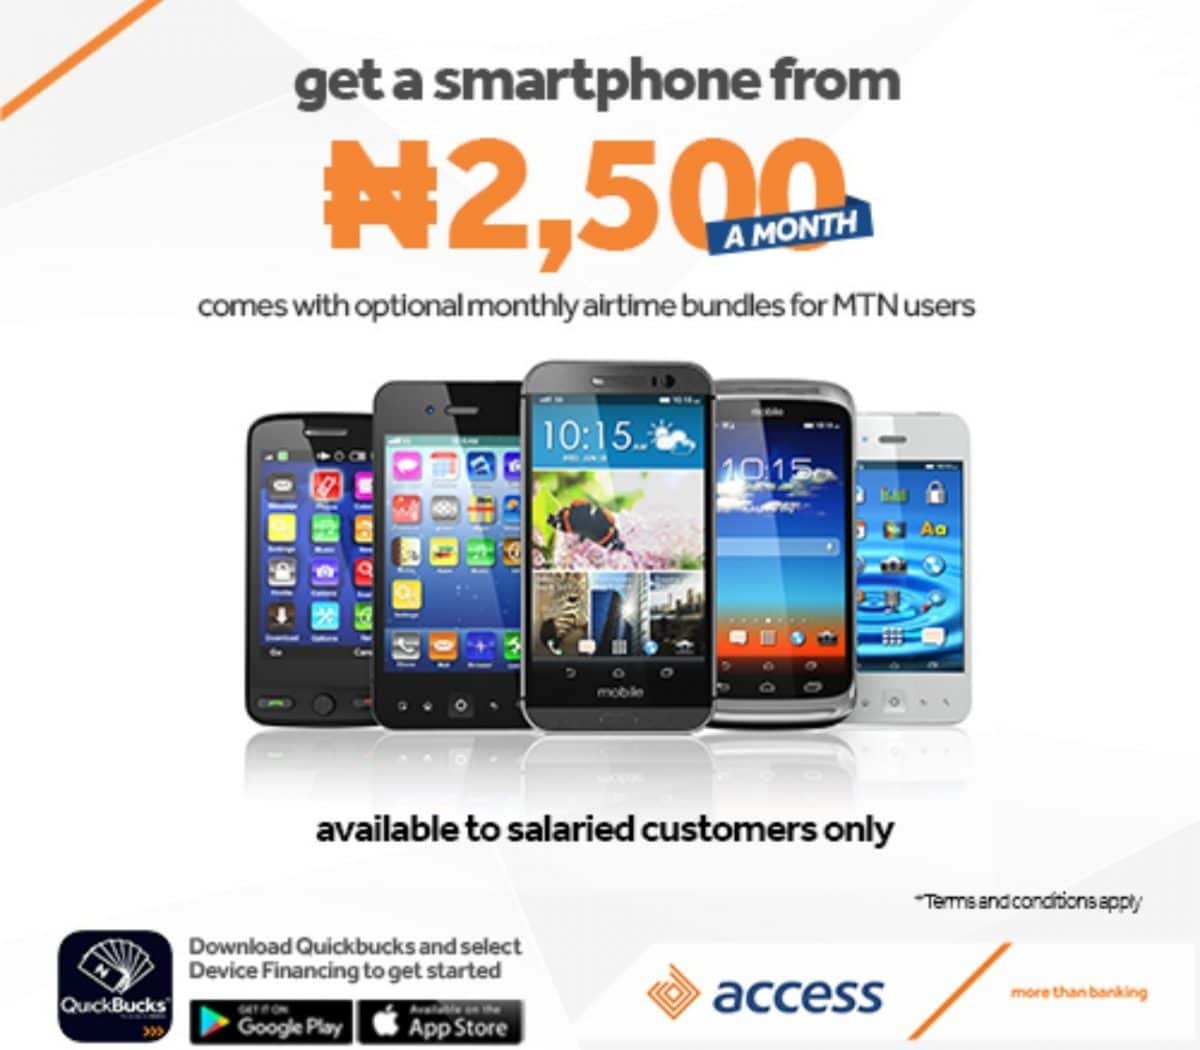 Access Bank Announces the launch of smartphone Device Finance Scheme to Customers